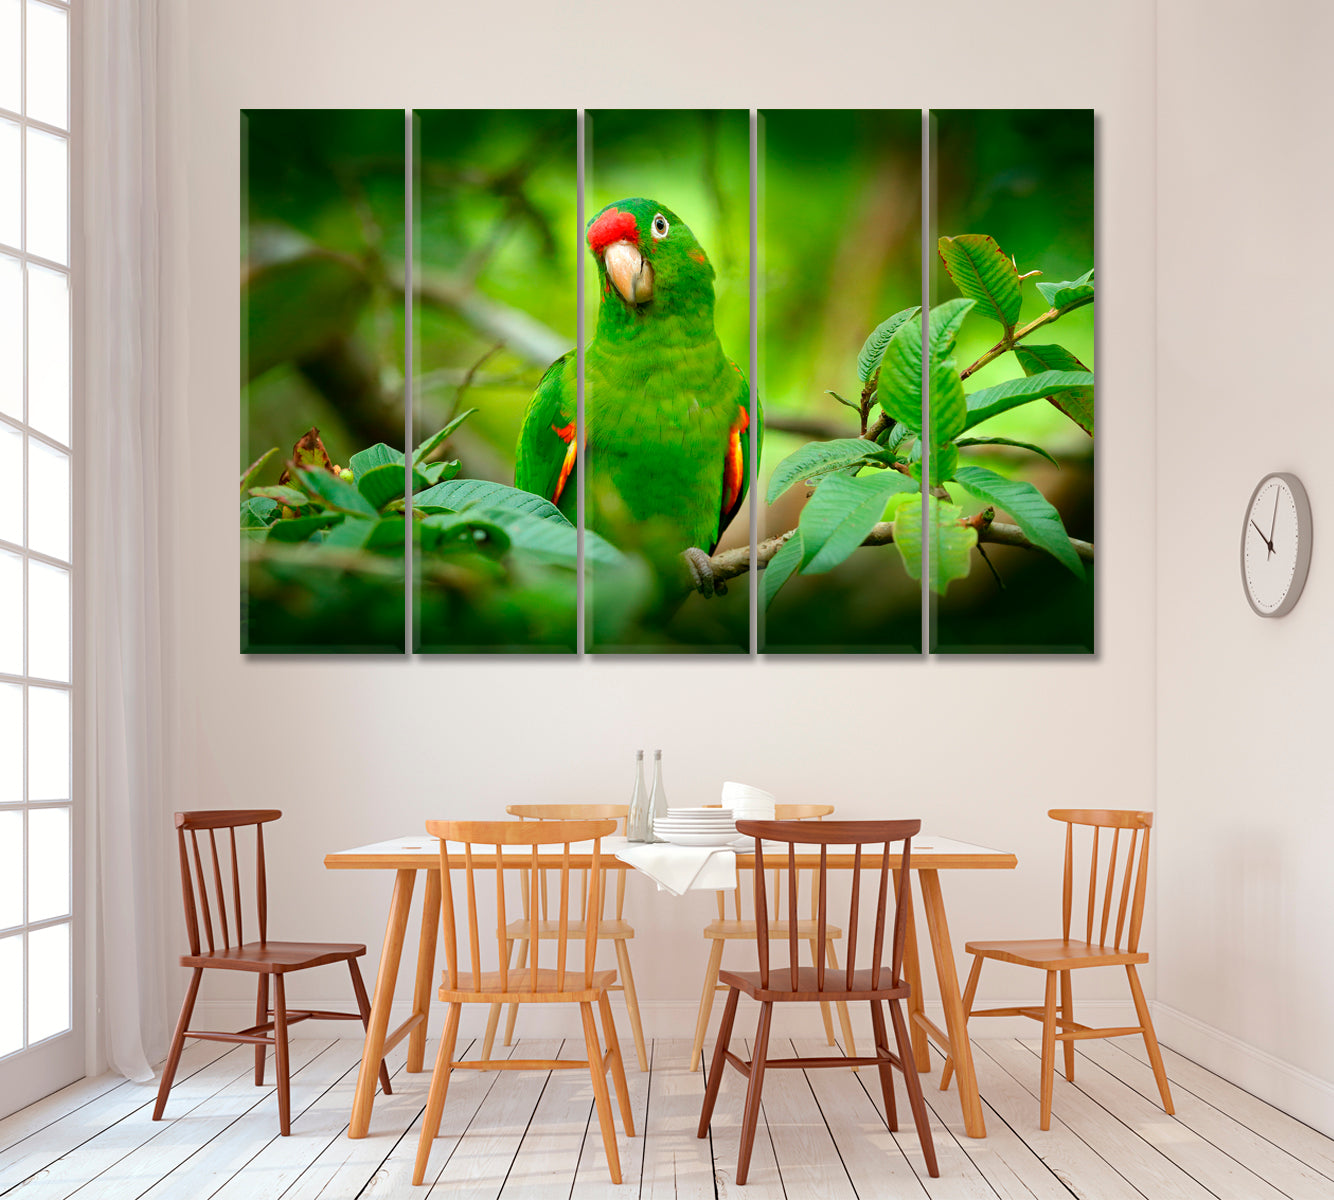 Green Parrot (Crimson-Fronted Parakeet) Costa Rica Canvas Print ArtLexy 5 Panels 36"x24" inches 